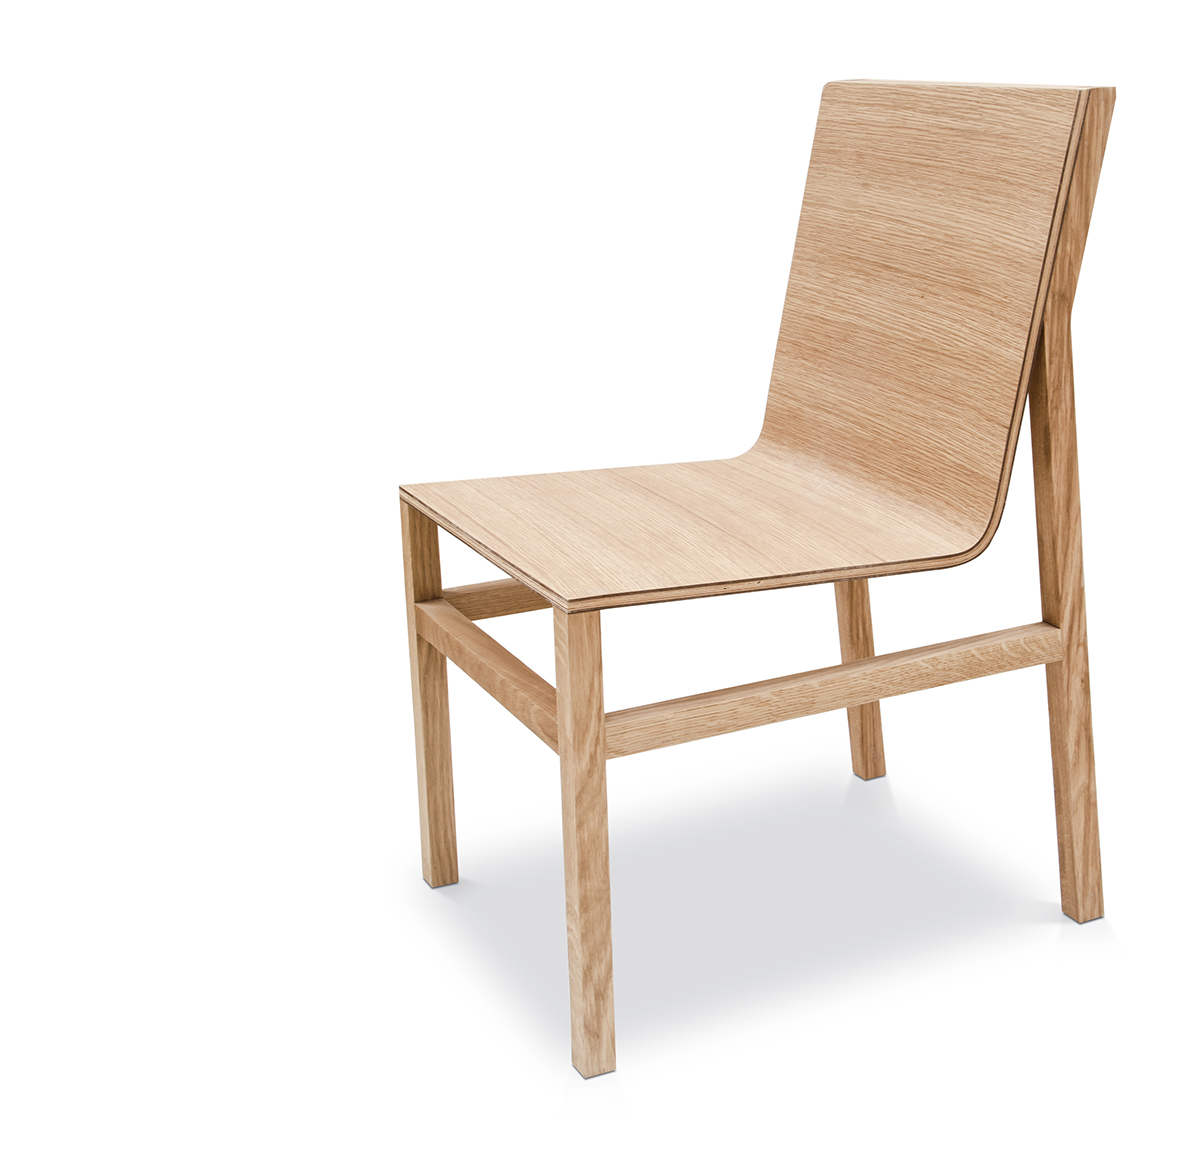 furniture contemporary furniture modern furniture chair timber chair plywood chair